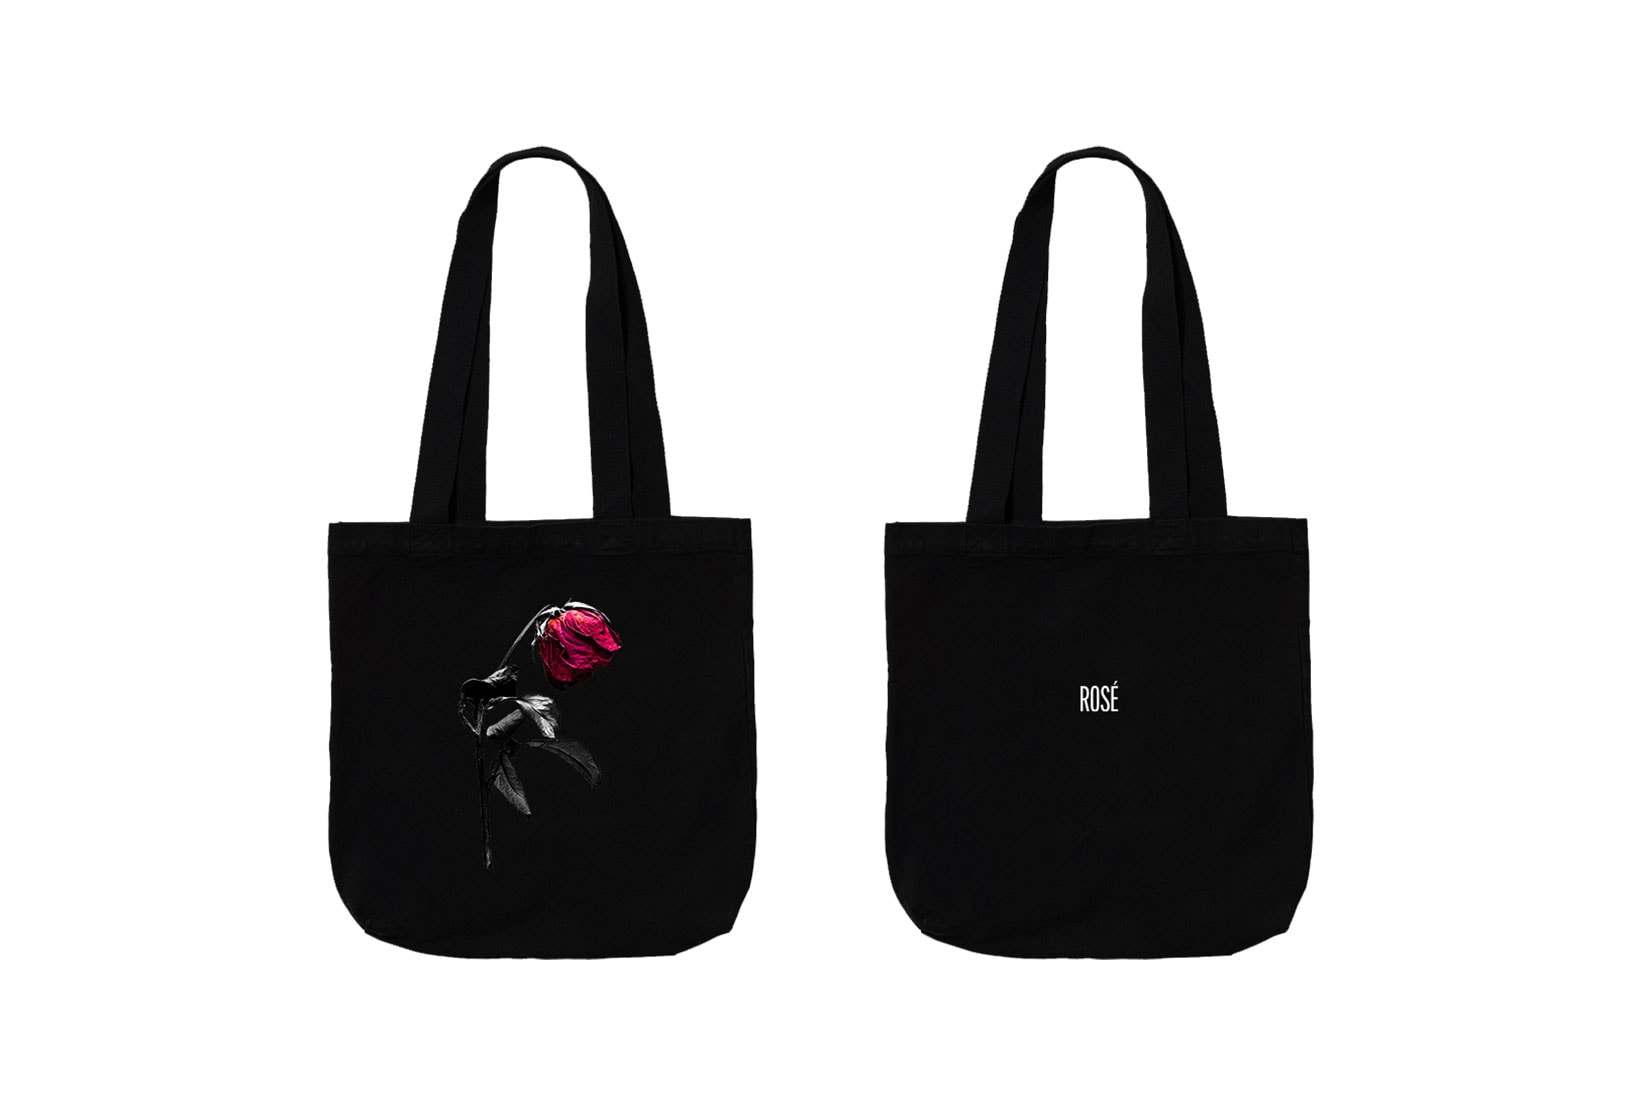 blackpink rose merch r solo project on the ground gone tote bag black